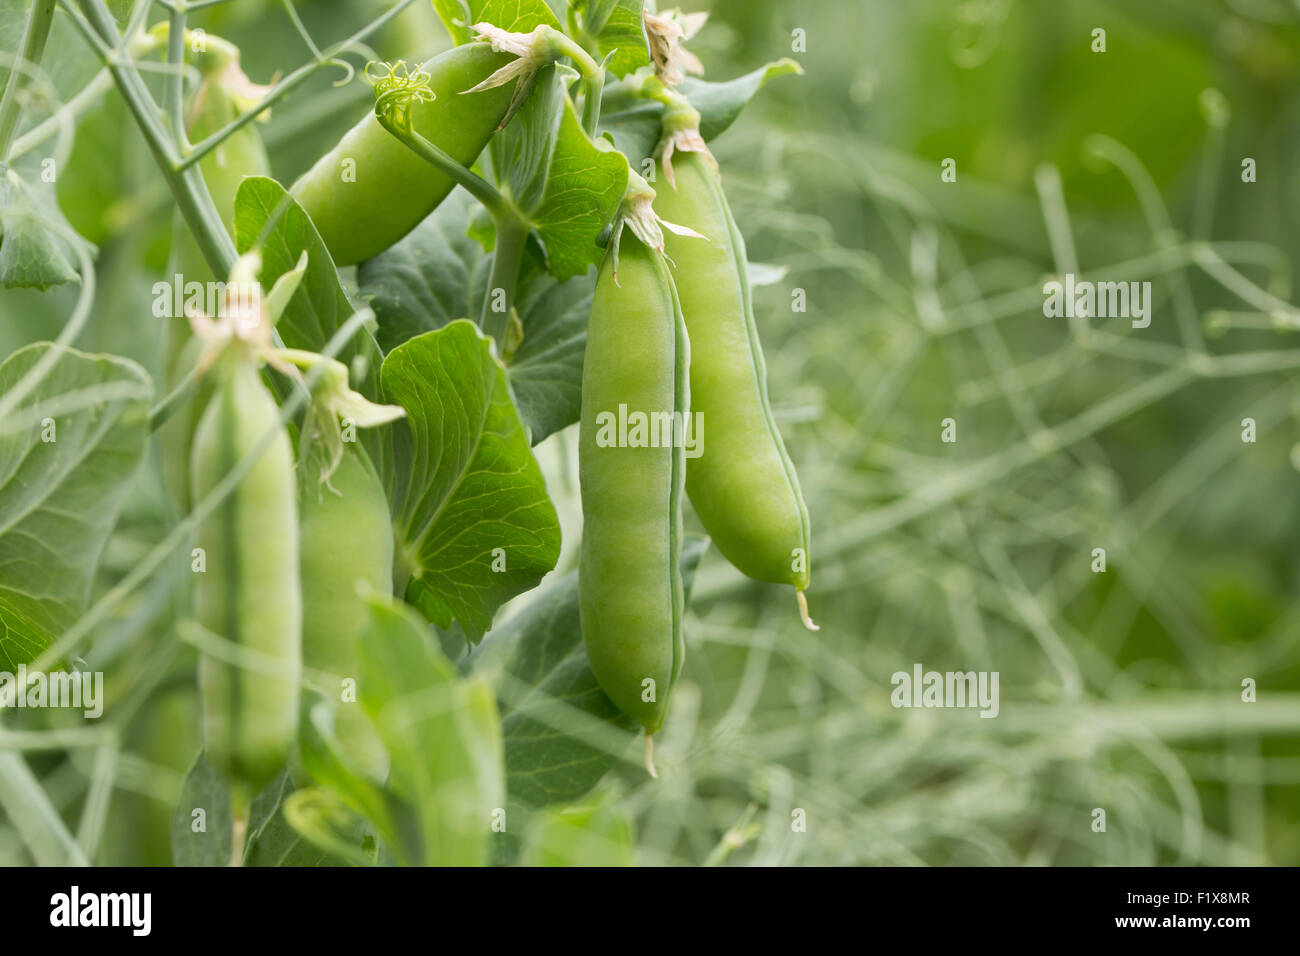 close up of green peas. Stock Photo